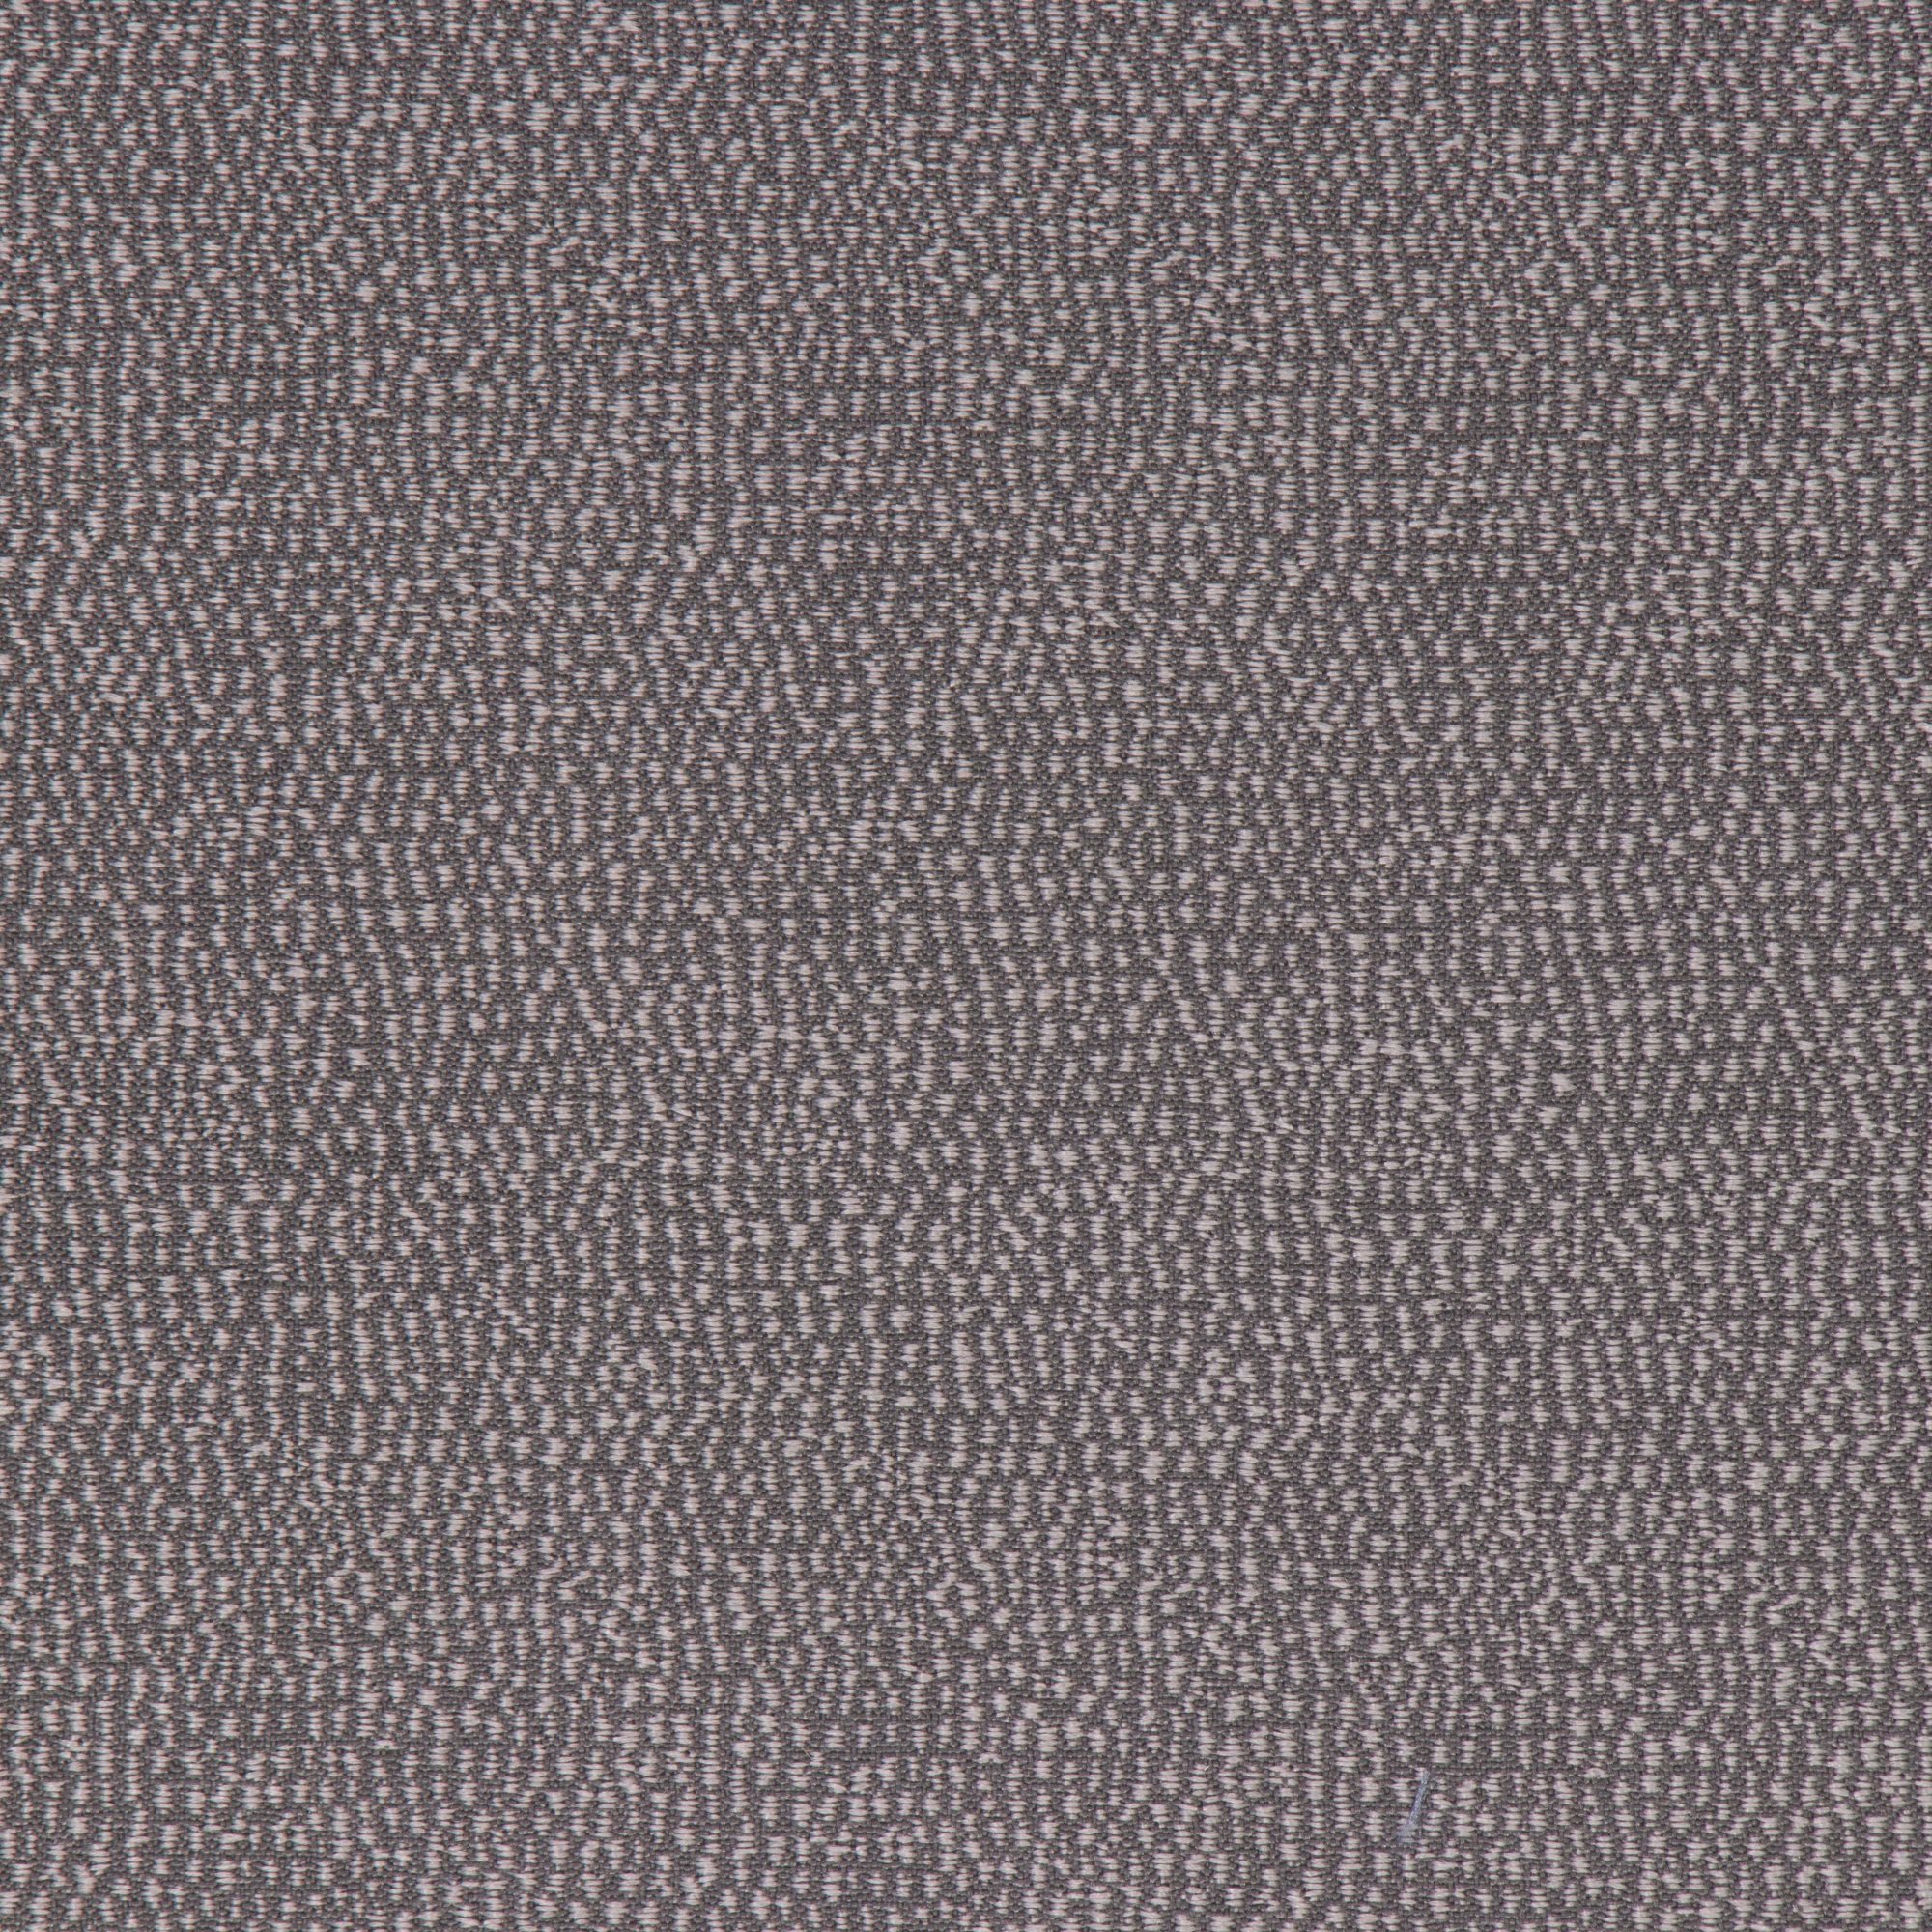 Fabric from Bella Dura and Bella Dura Home in the Astoria pattern and Charcoal color.